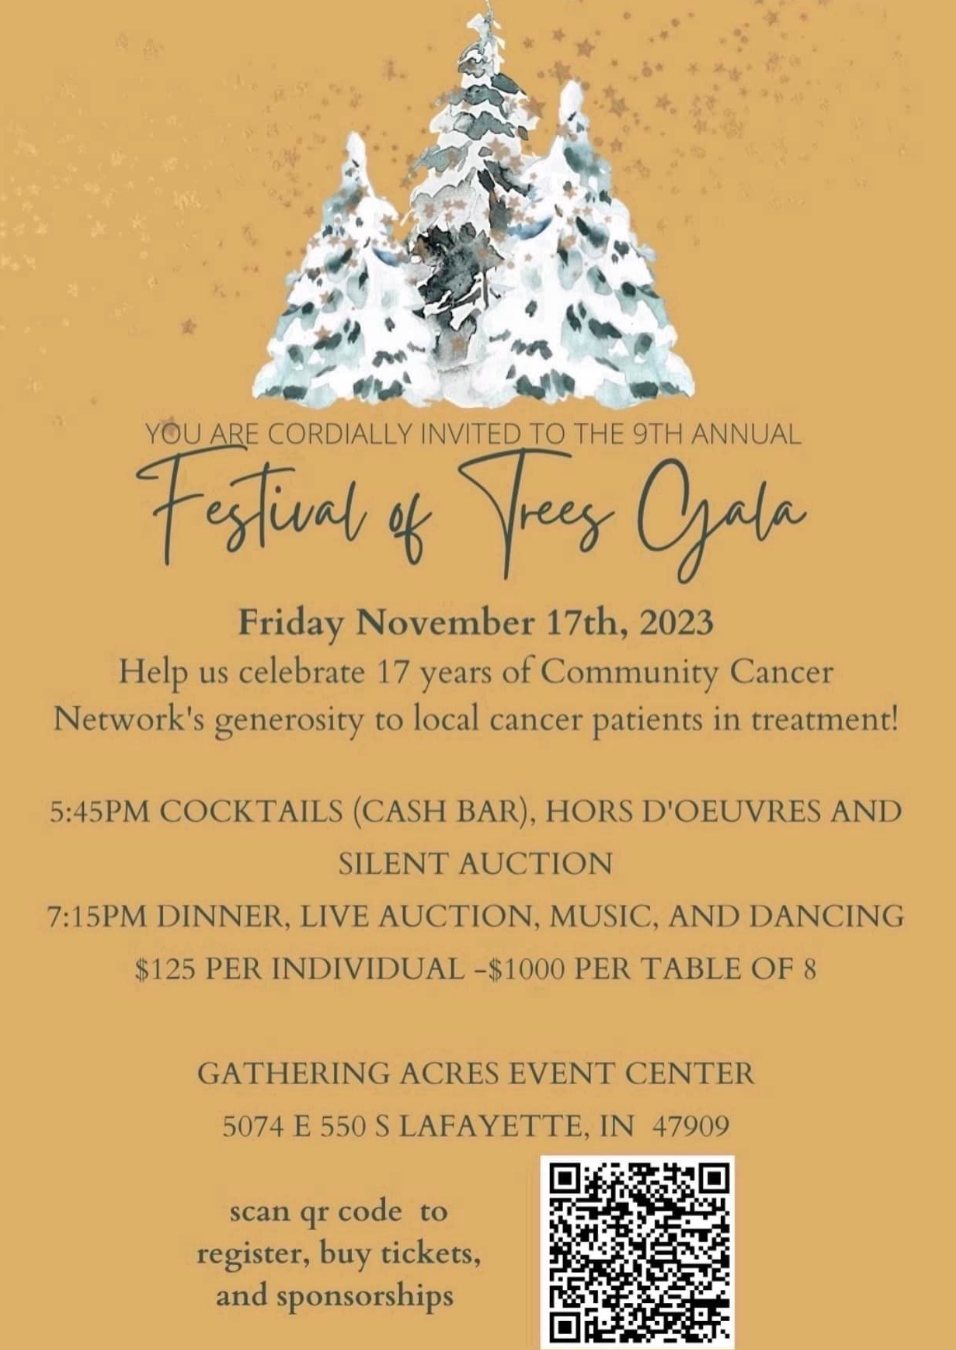 Tickets for the 2023 Festival of Trees Gala are sold out, but community members not in attendance can still bid on silent auction items through the link found on the Community Cancer Network Facebook page.